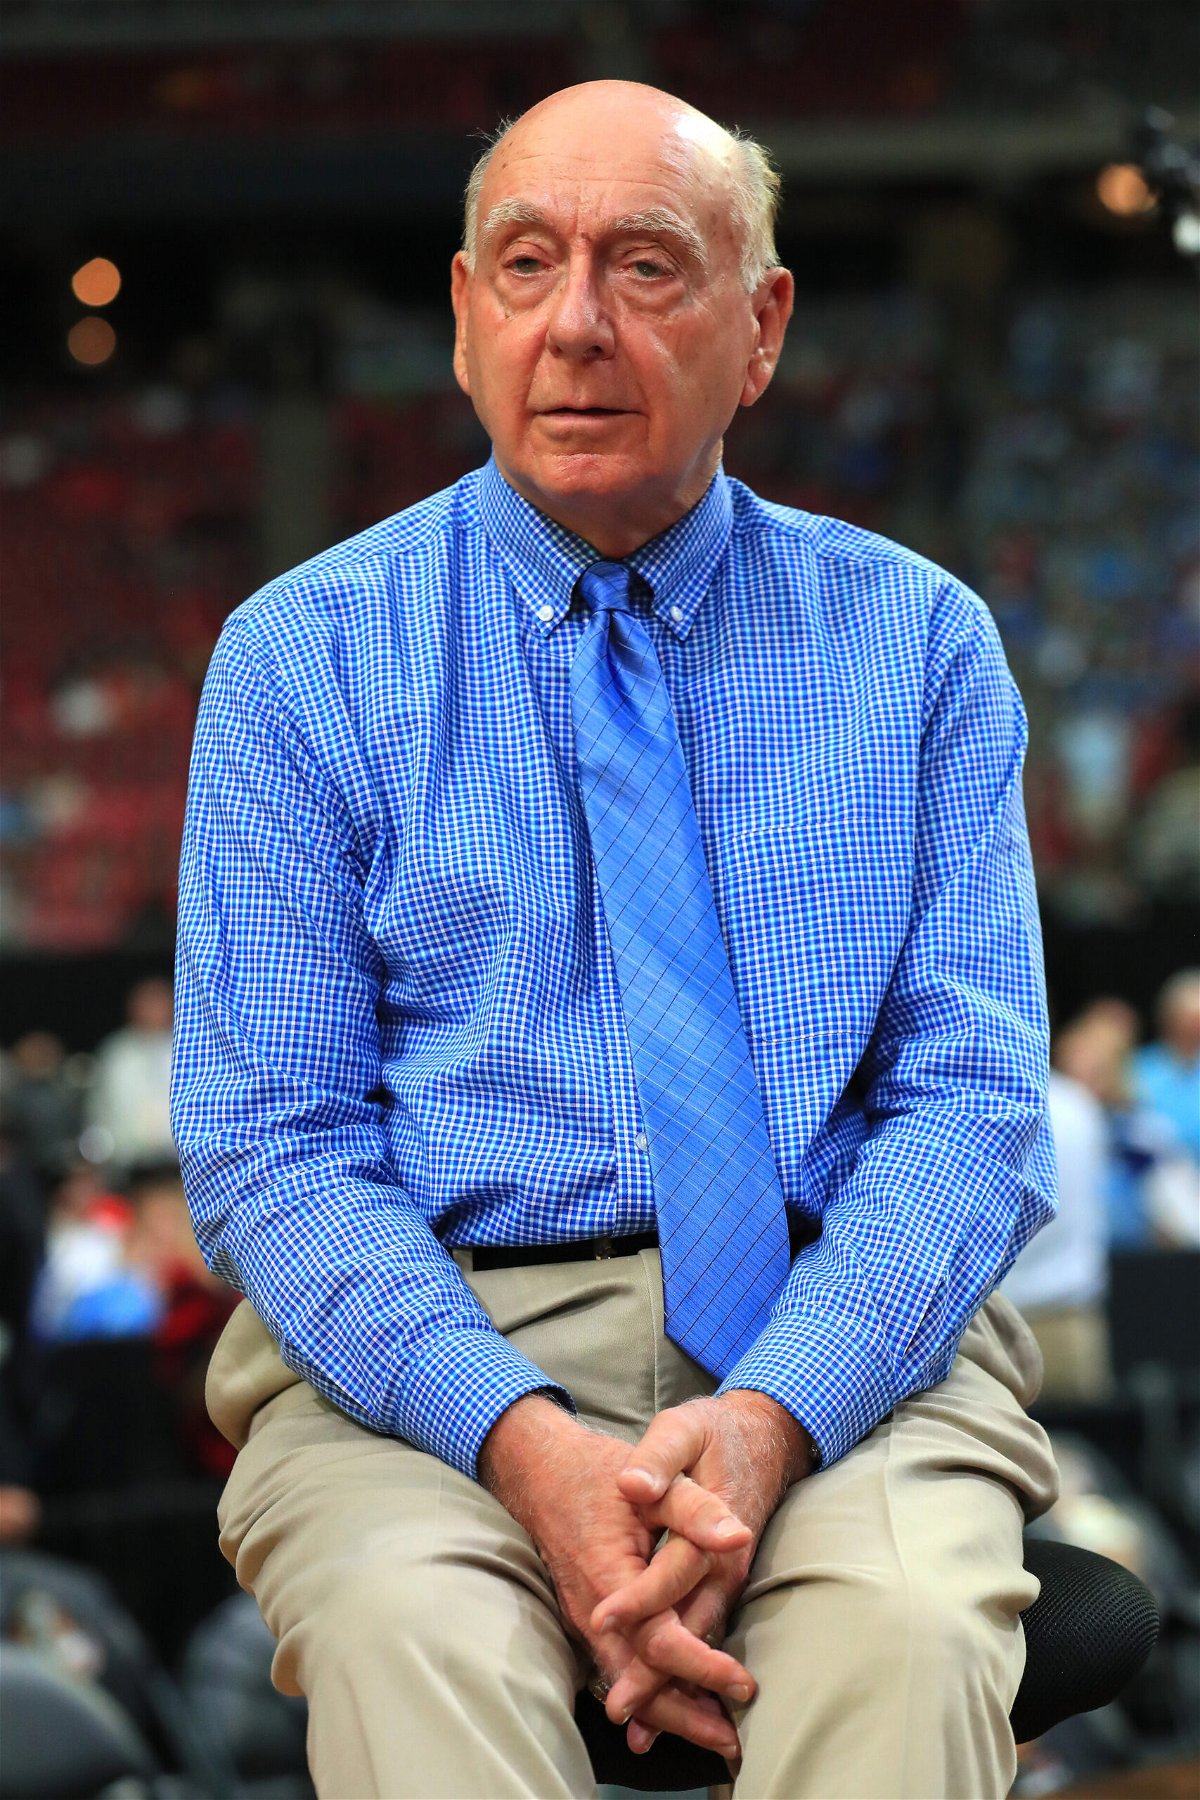 <i>Tom Pennington/Getty Images/FILE</i><br/>Famed basketball announcer Dick Vitale has lymphoma and will undergo six months of chemotherapy